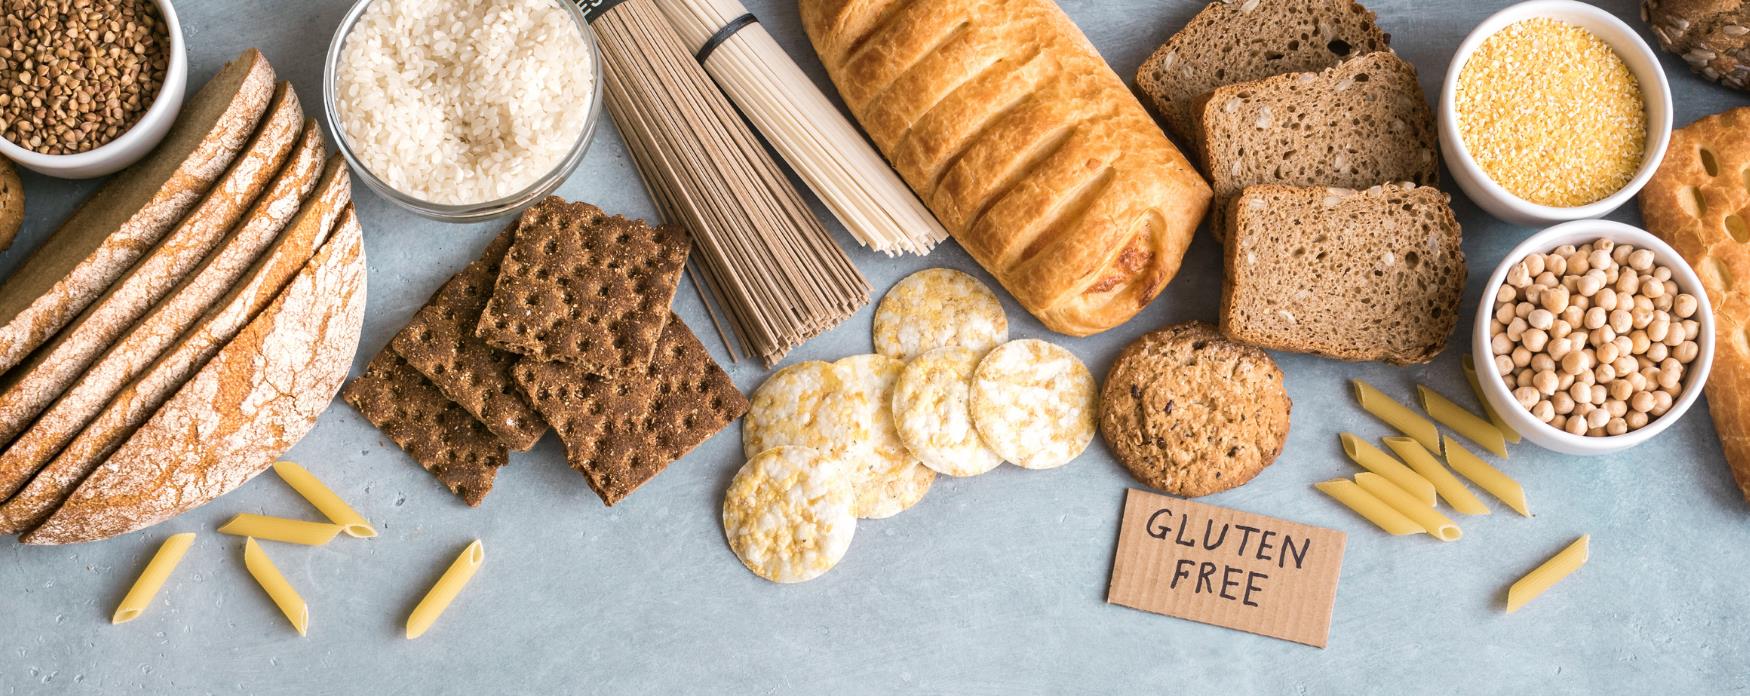 Selection of bread and crackers marked as gluten free